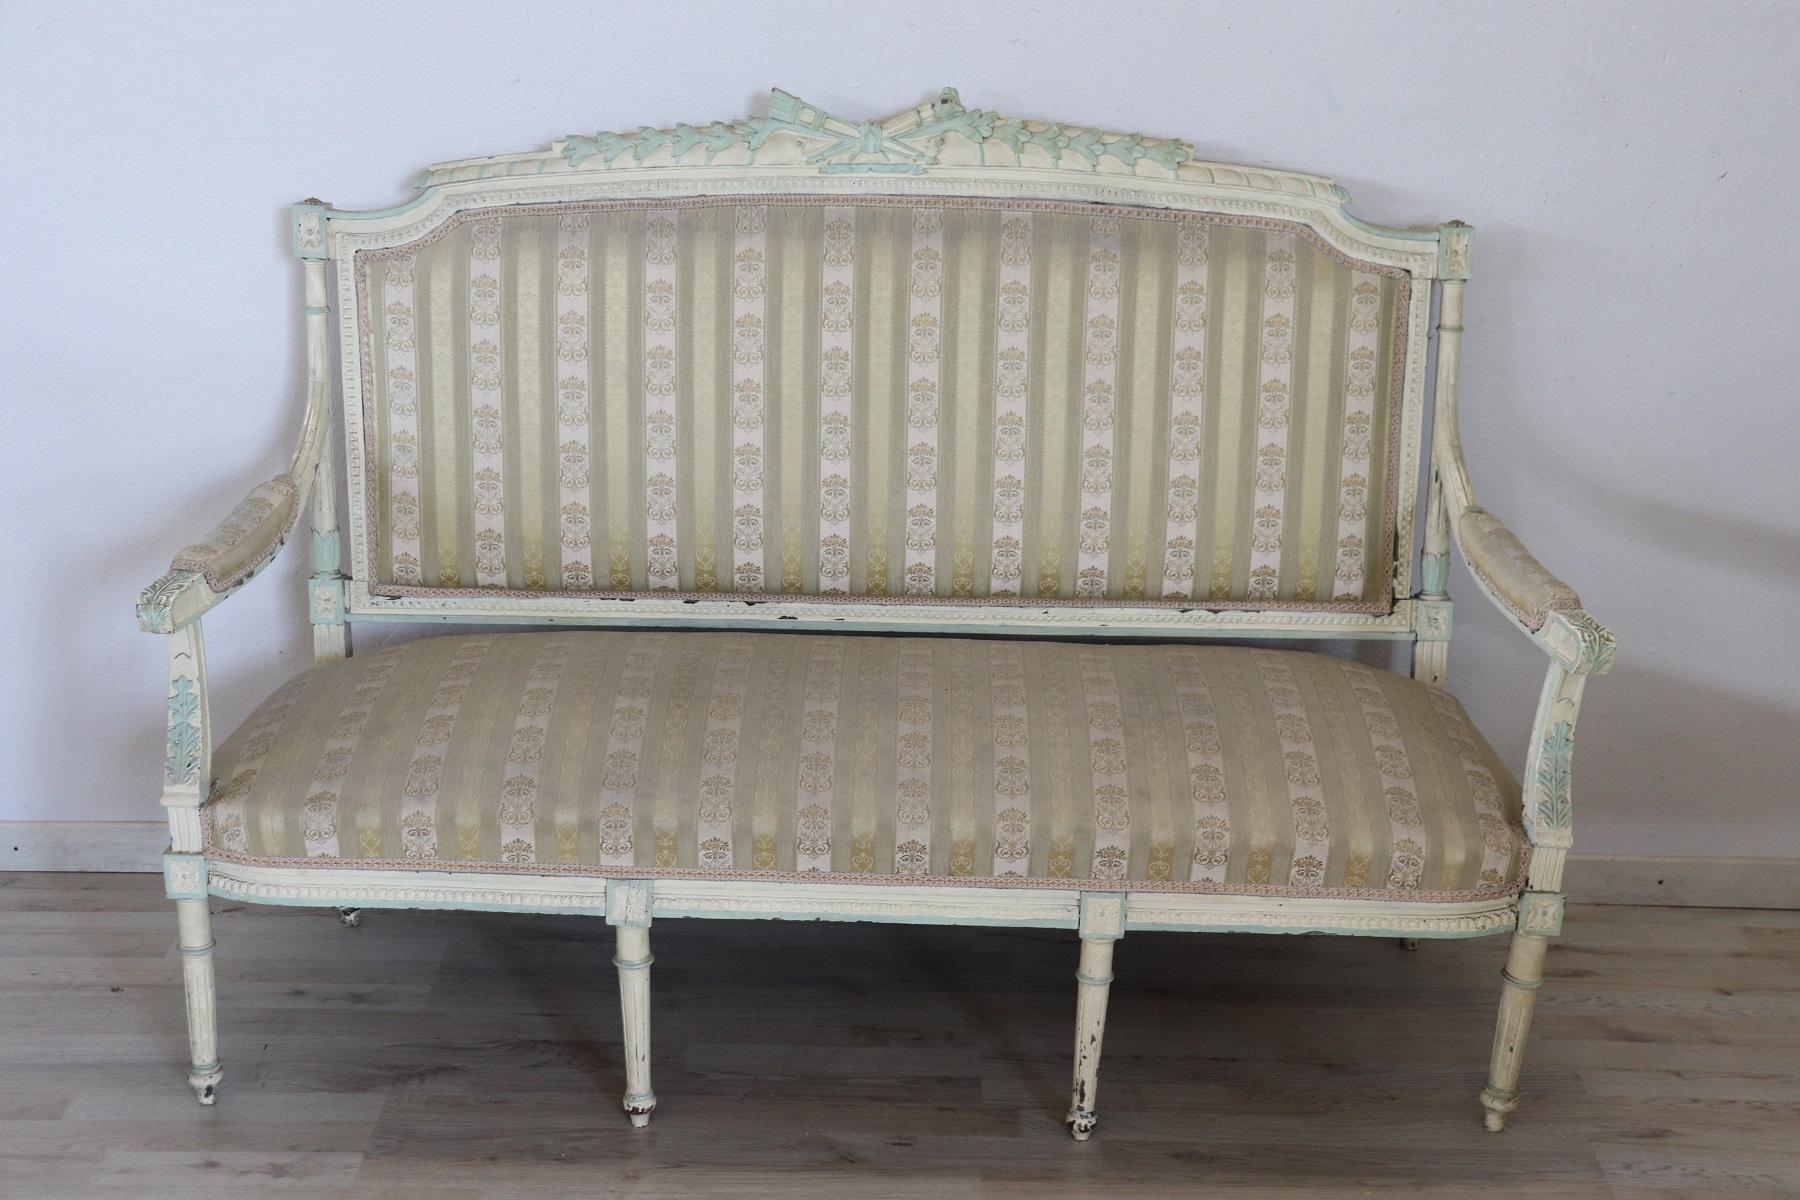 Rare complete Italian luxury Louis XVI style living room set includes:
1 large sofa
2 armchairs
4 chairs
Refined living room set in lacquared wood. The living room comes from an important Italian villa and embellished the central hall dedicated